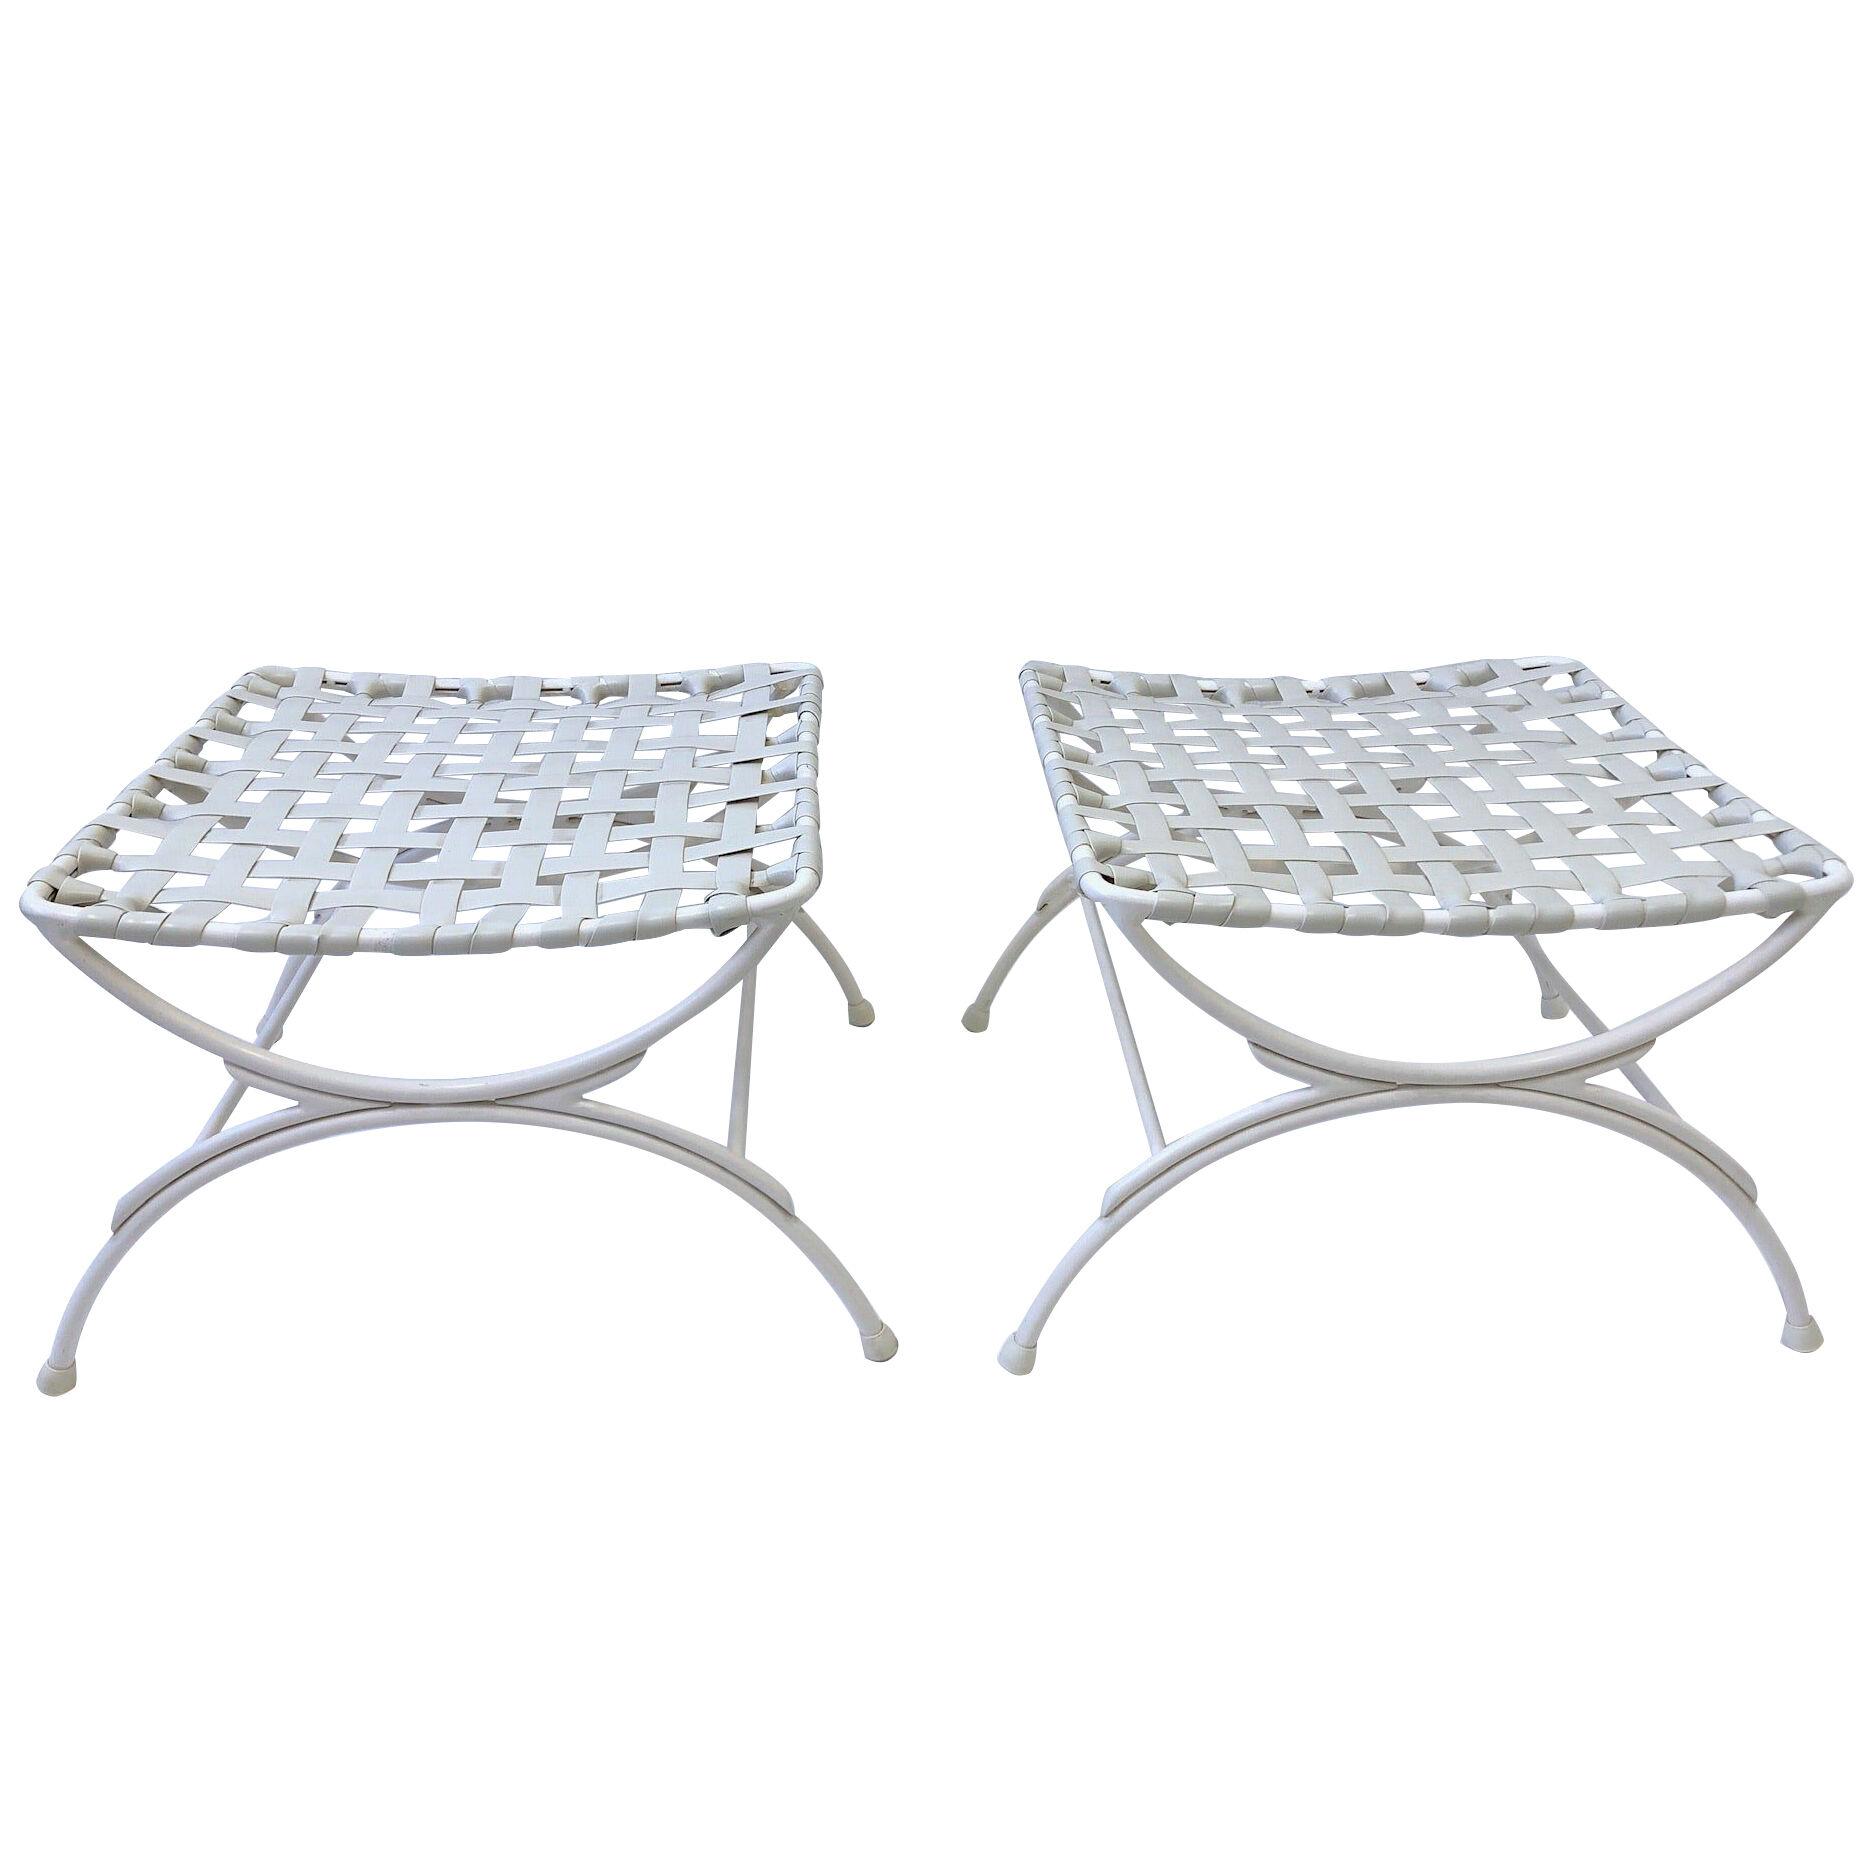 off White Pair of Outdoor Ottoman by Keller Scroll of Miami